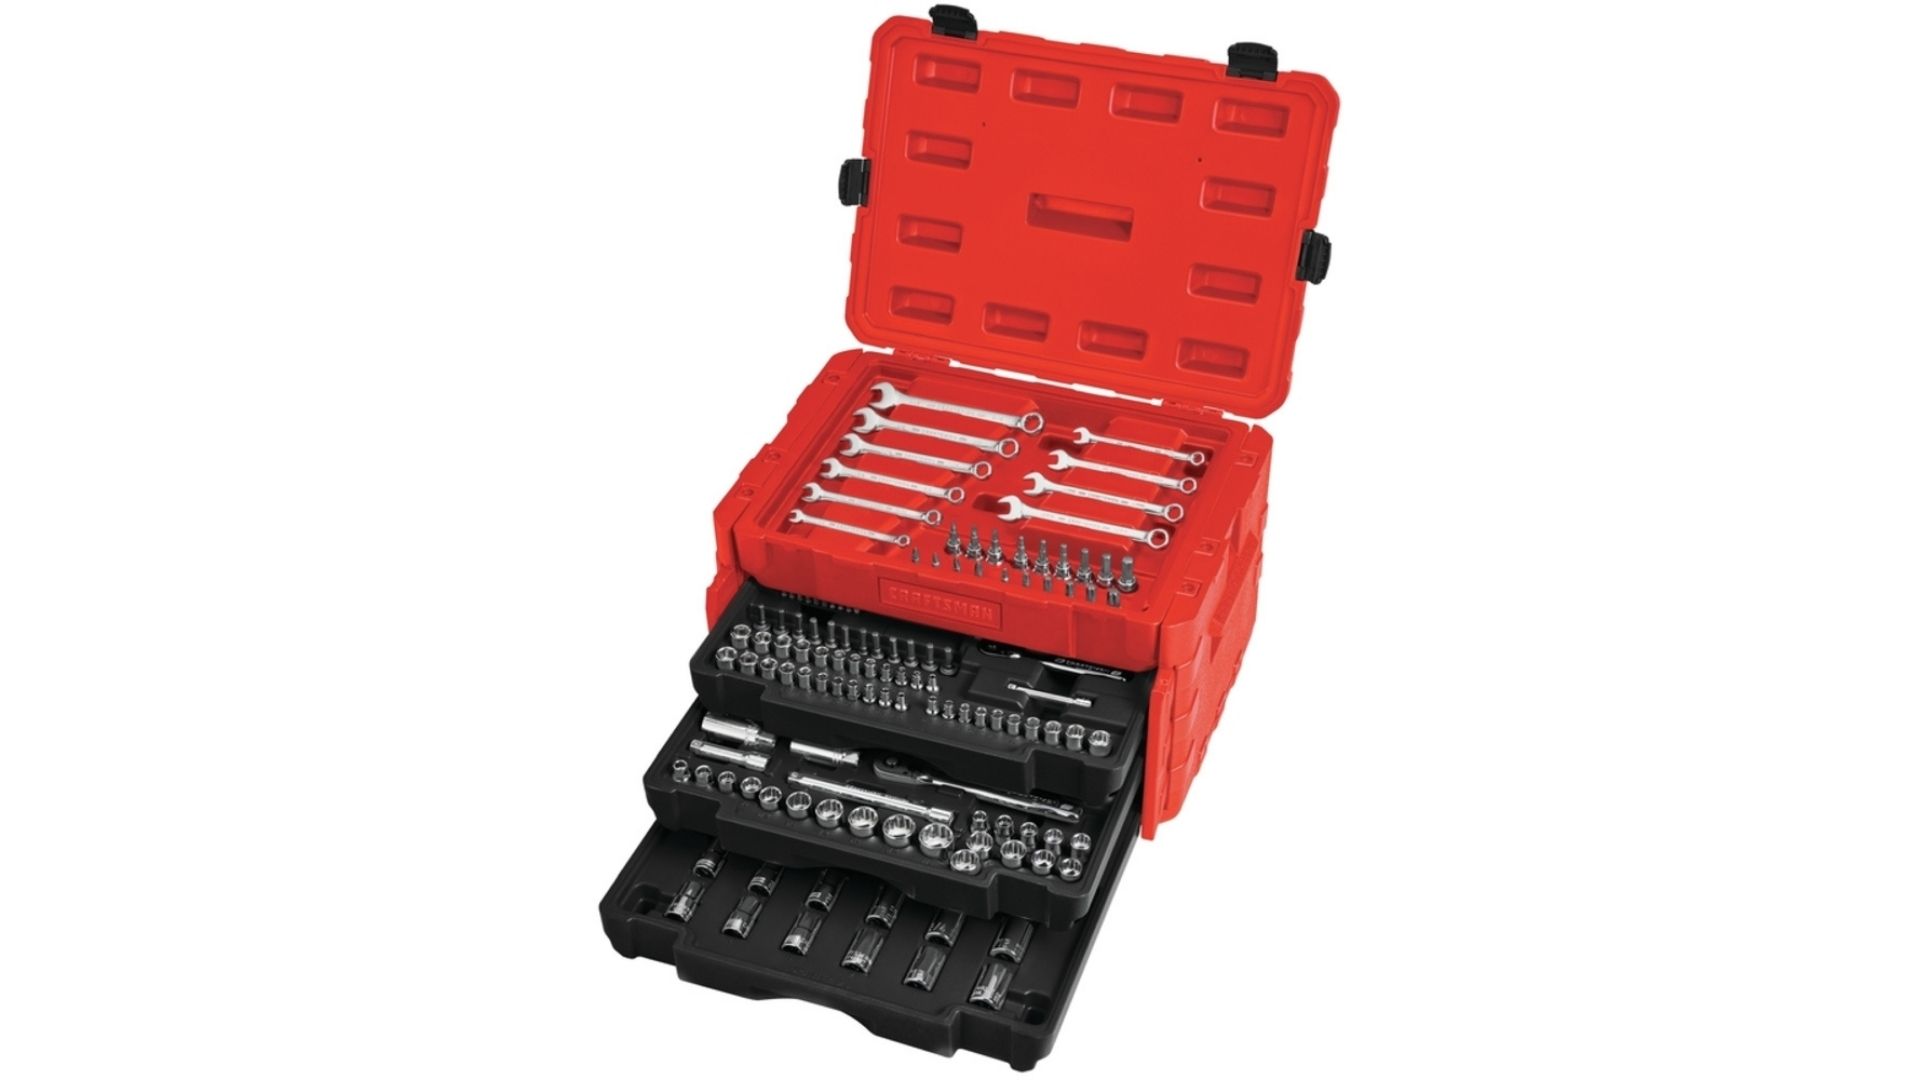 Craftsman Mechanic's Tool Set review: hands-on with the ultimate tool set